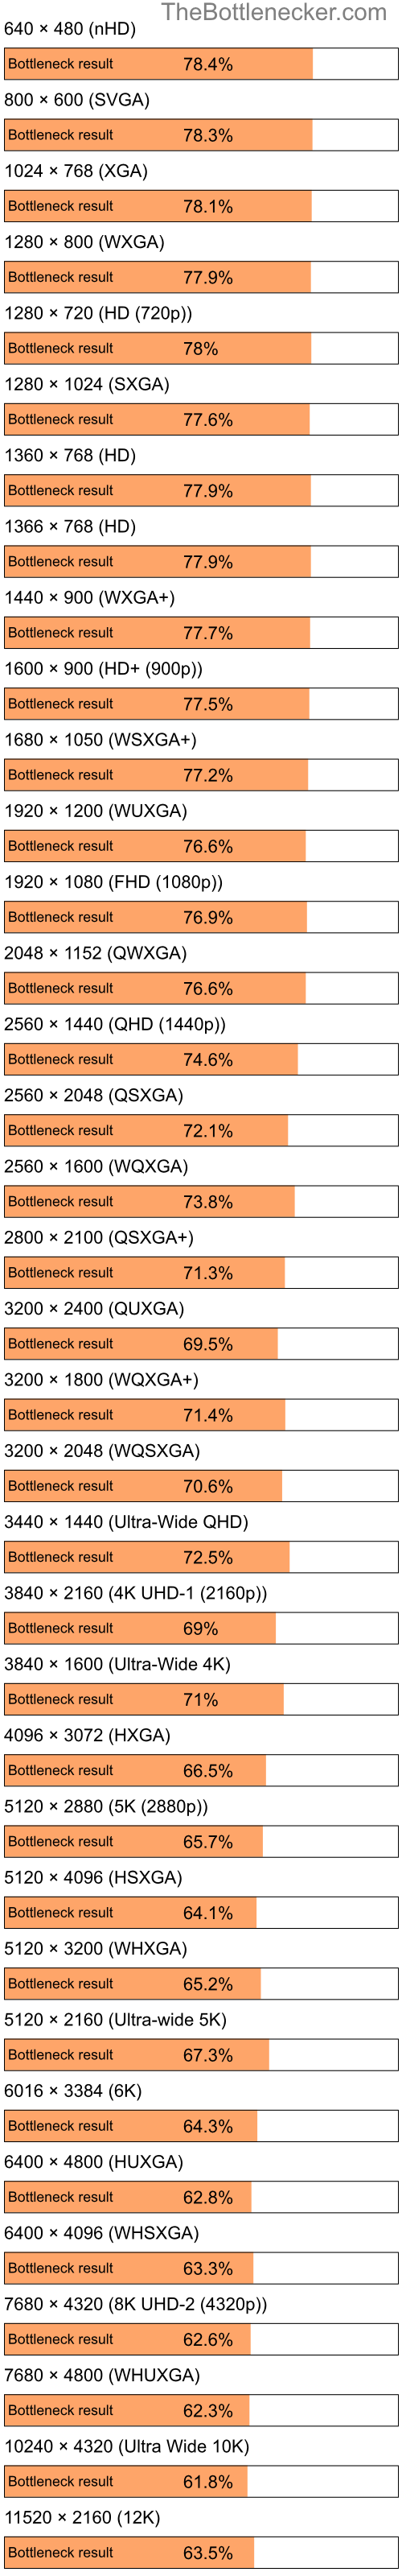 Bottleneck results by resolution for Intel Pentium 4 and NVIDIA GeForce GTX 1660 Ti in Graphic Card Intense Tasks